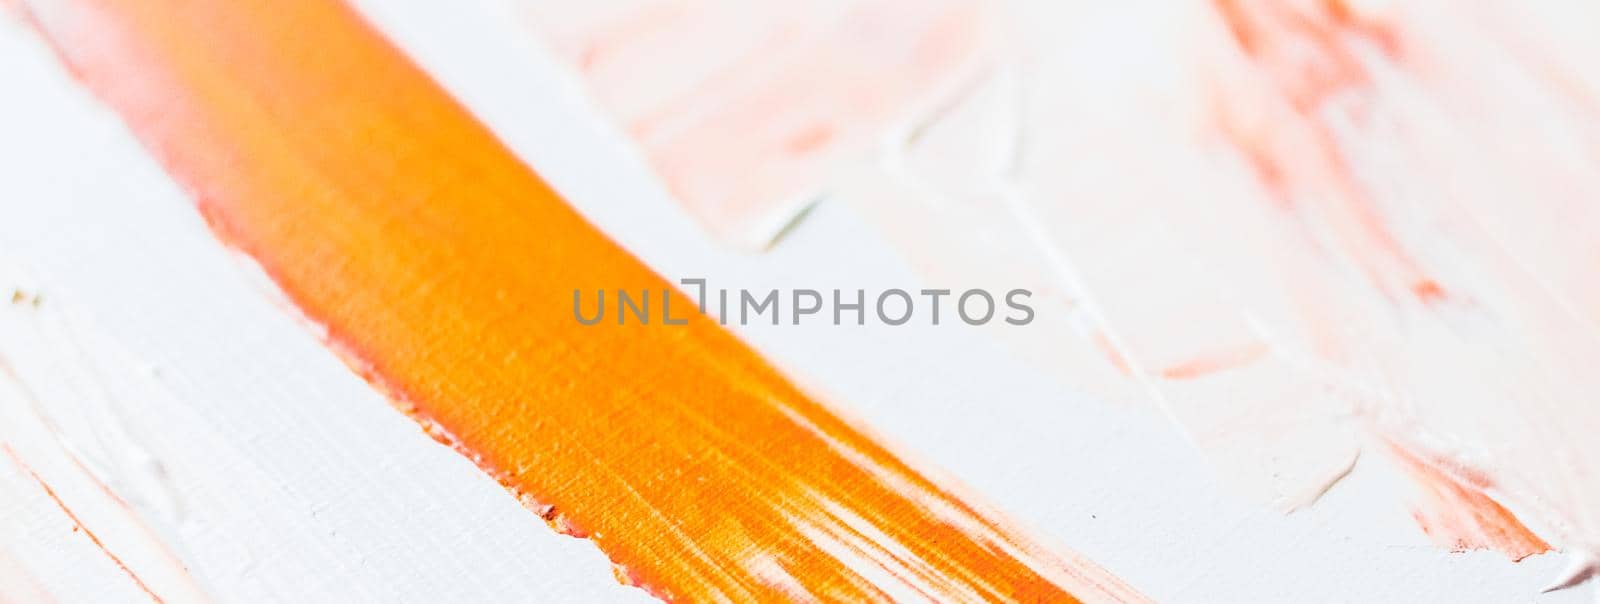 Artistic abstract texture background, orange acrylic paint brush stroke, textured ink oil splash as print backdrop for luxury holiday brand, flatlay banner design by Anneleven